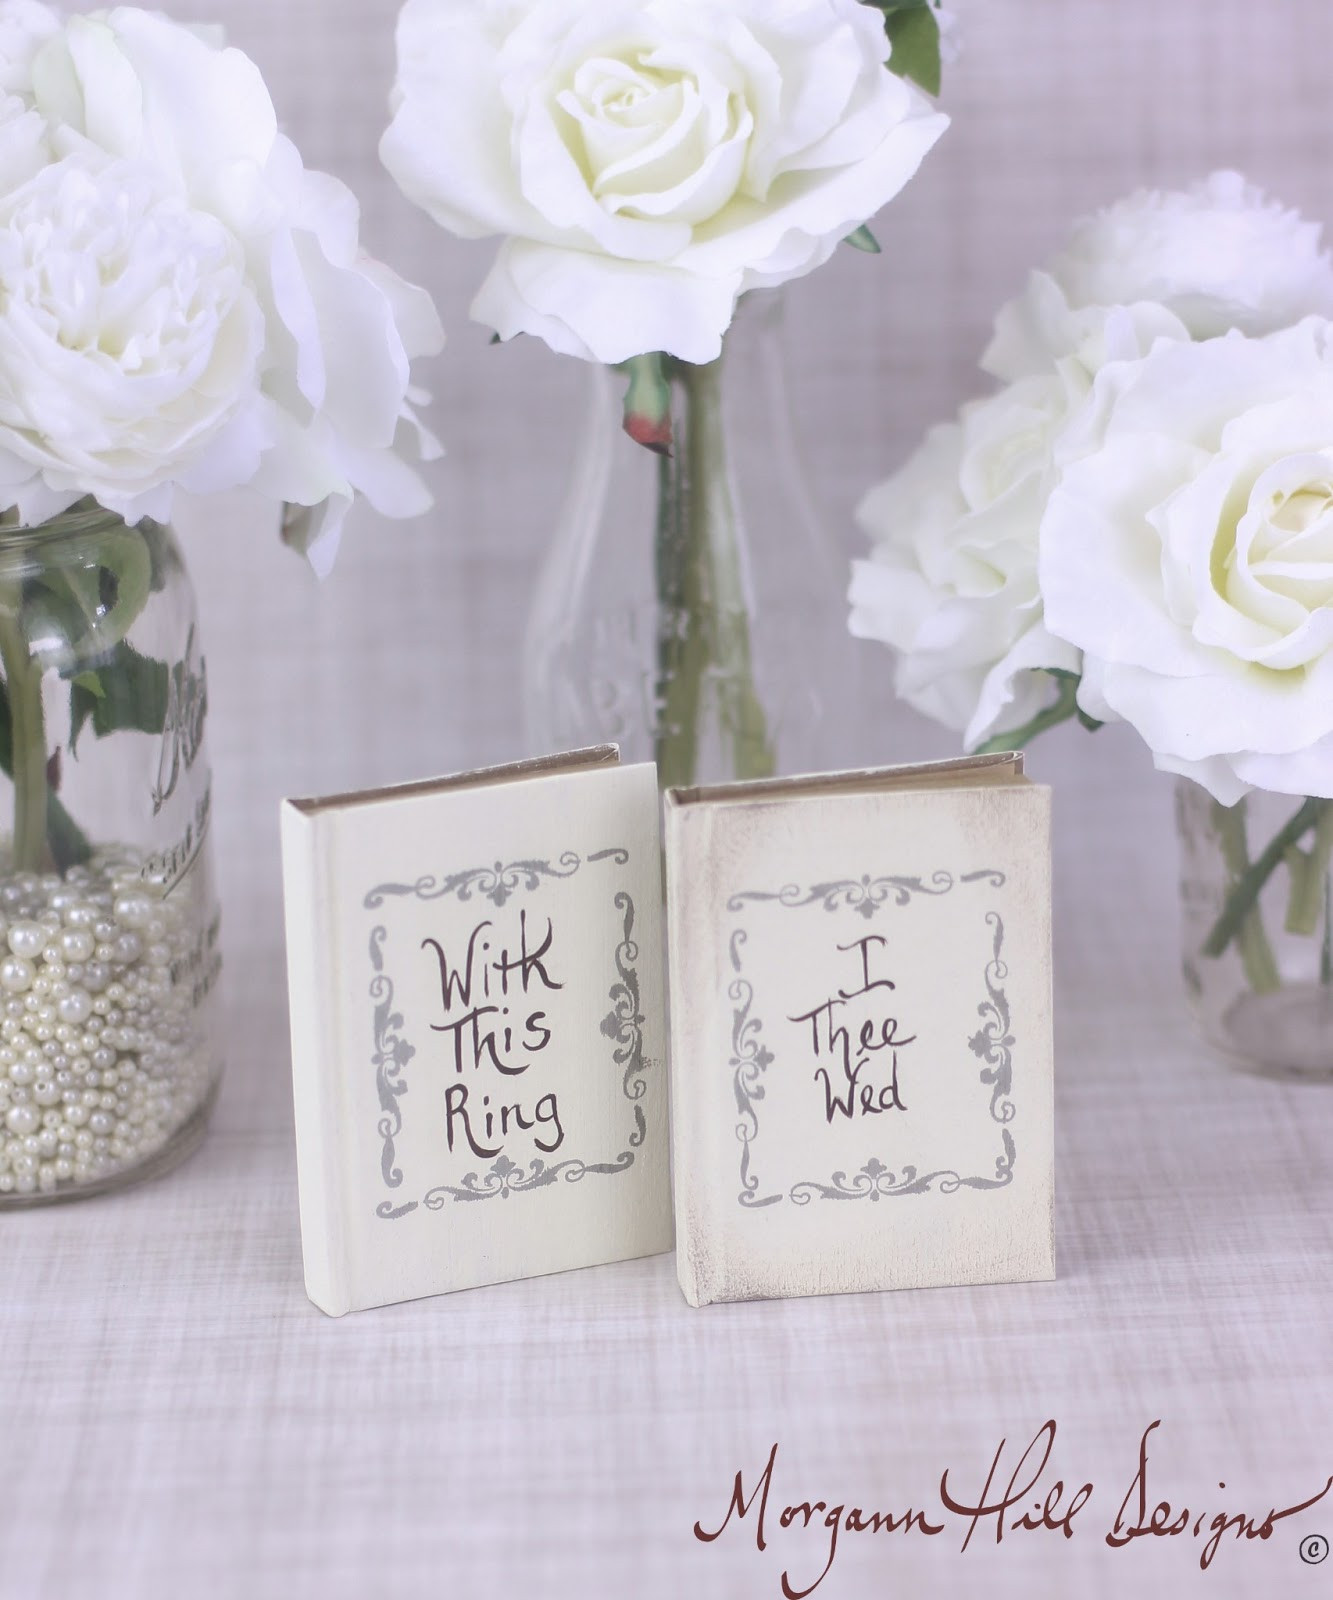 With This Ring I Thee Wed Vows
 Morgann Hill Designs Wedding Vows Books With This Ring I